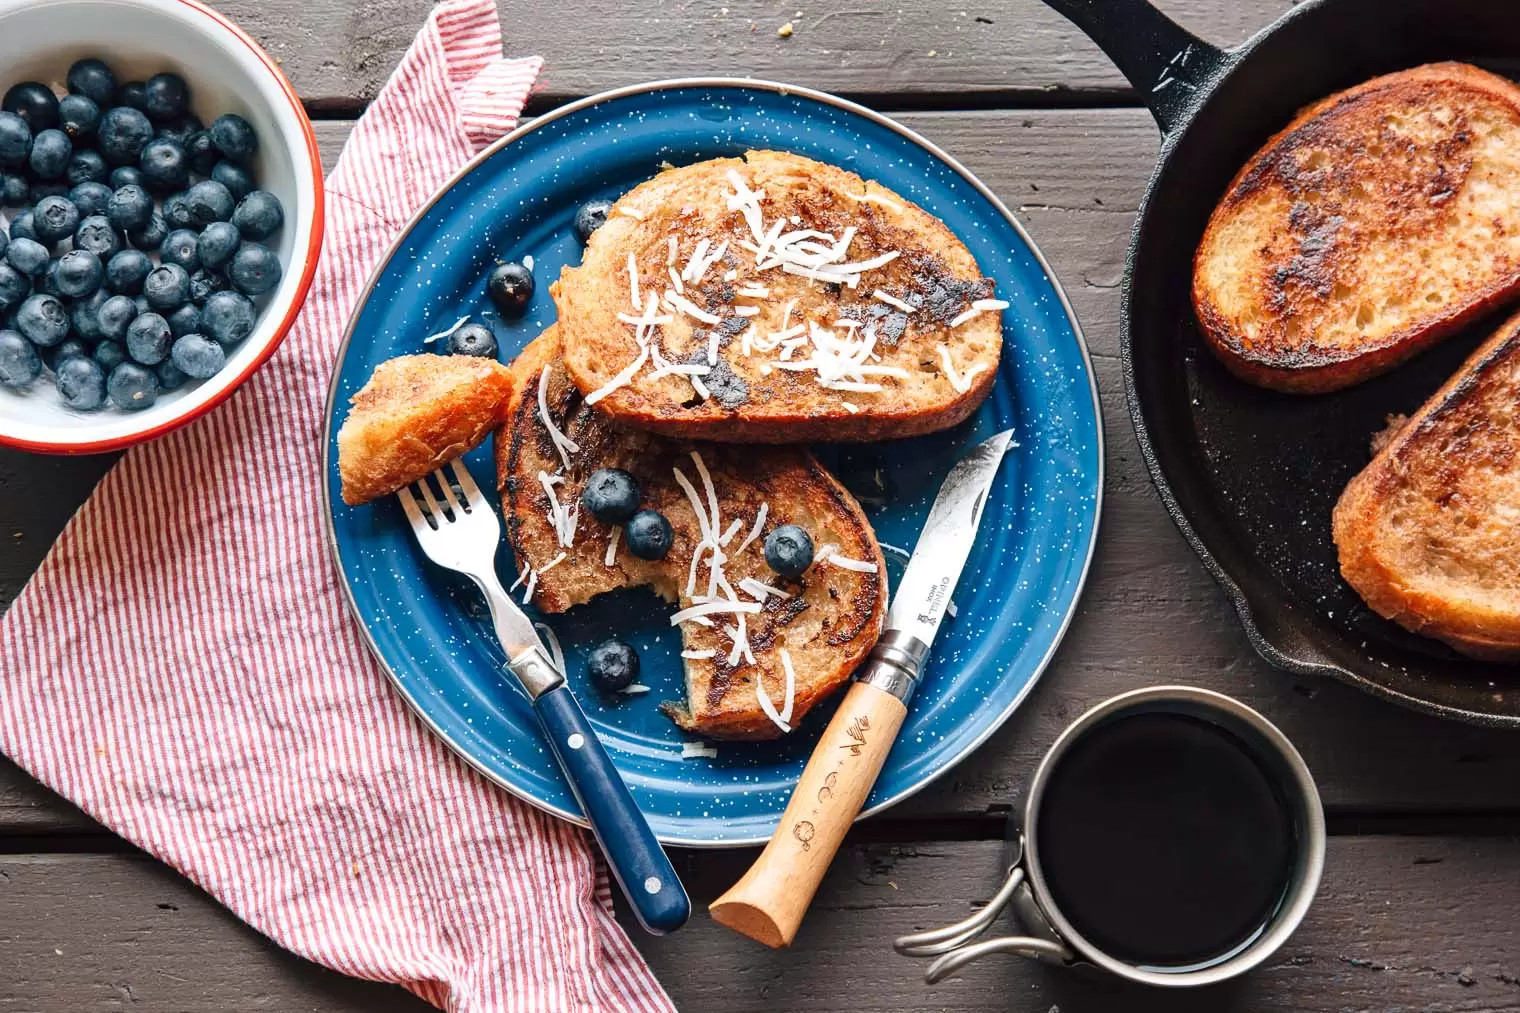 Vegan Coconut French Toast on a blue plate on a camping table.